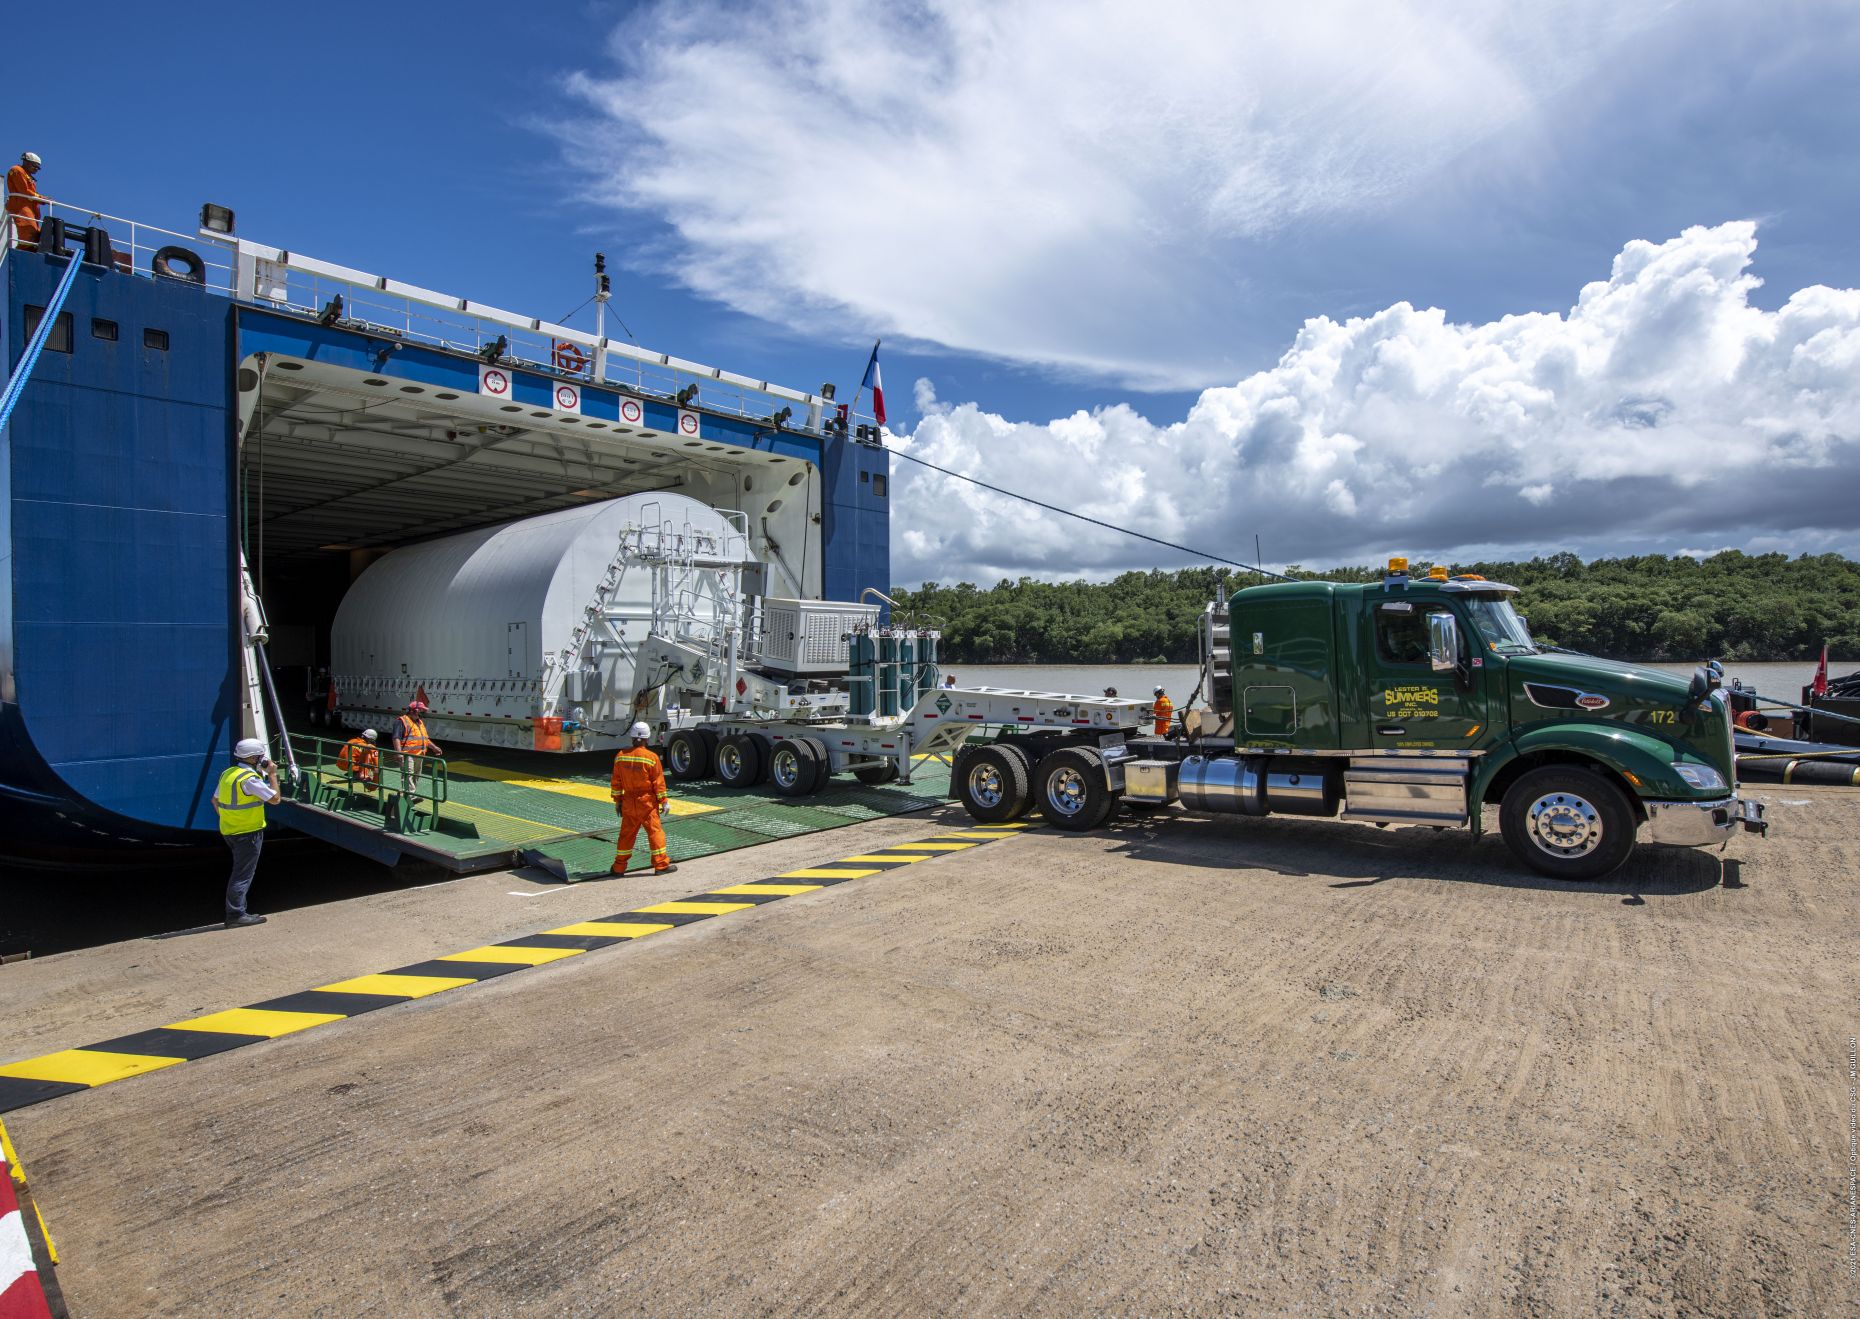 The James Webb Space Telescope arrived safely at the port of Pariacabo in French Guiana on 12 October 2021, before being launched on an Ariane 5 rocket from the European Spaceport. The eagerly awaited NASA mission was also supported by Austrian space technology from RUAG Space.